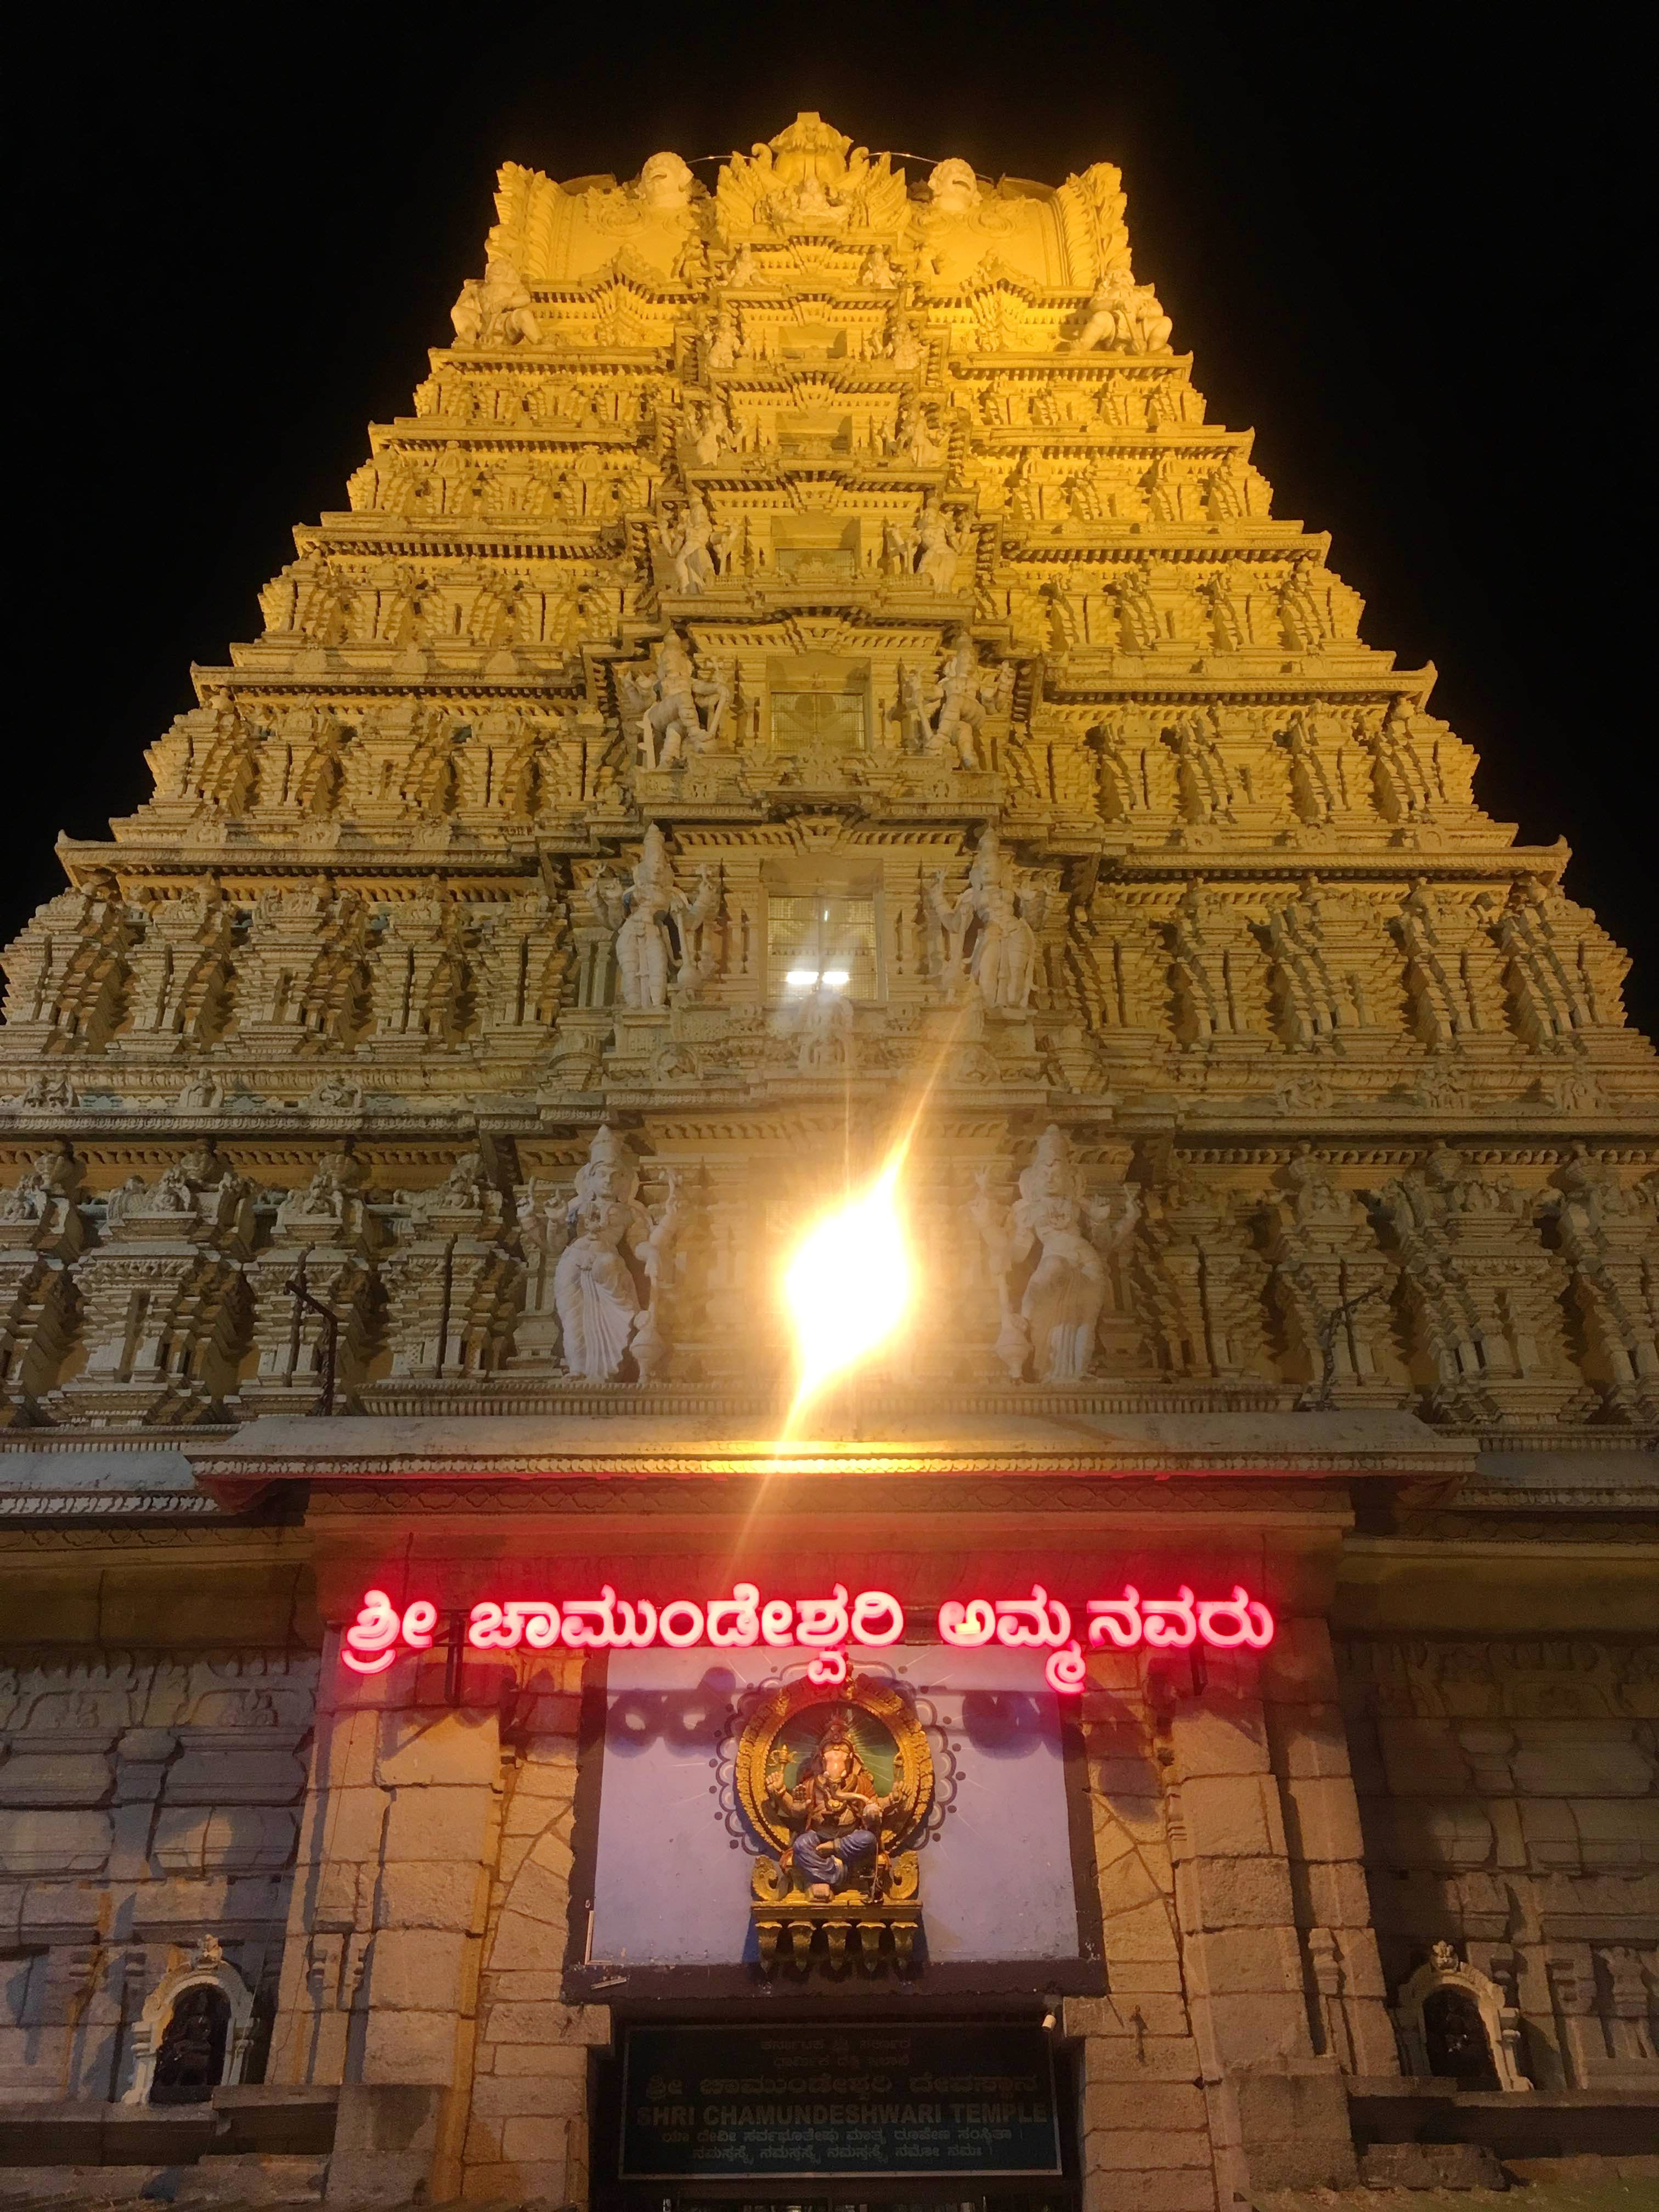 Landmark,Hindu temple,Historic site,Temple,Night,Place of worship,Building,Temple,Architecture,Ancient history